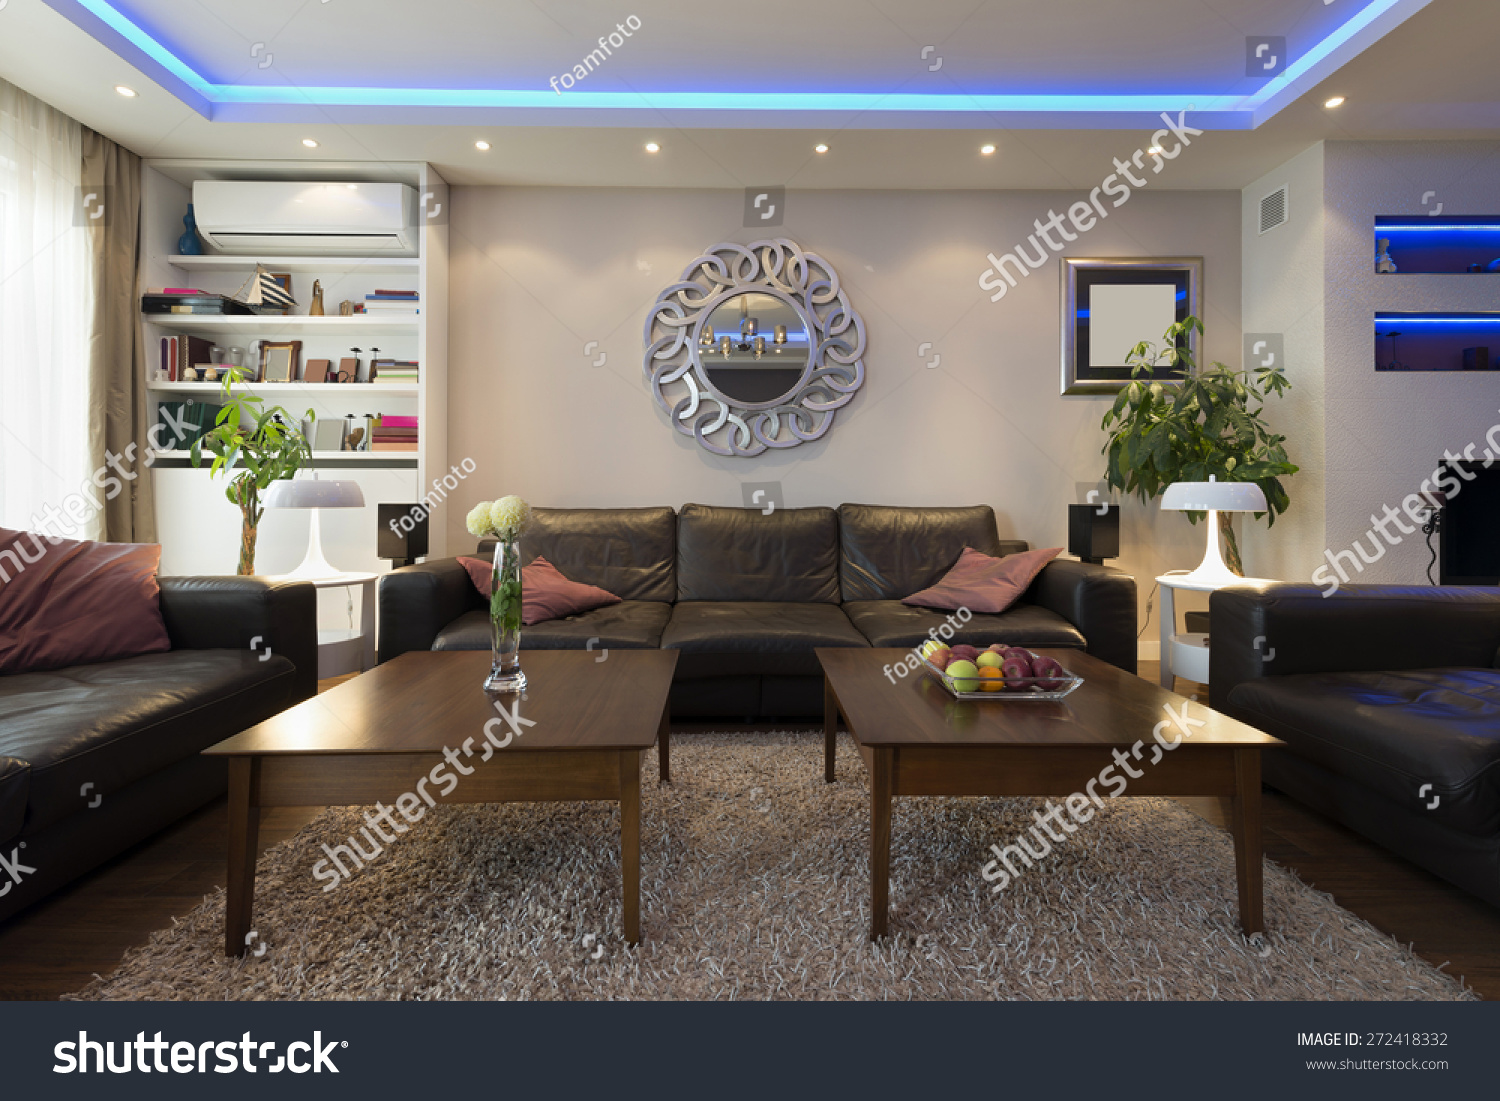 stock-photo-luxury-living-room-with-led-ceiling-lights-272418332 ...